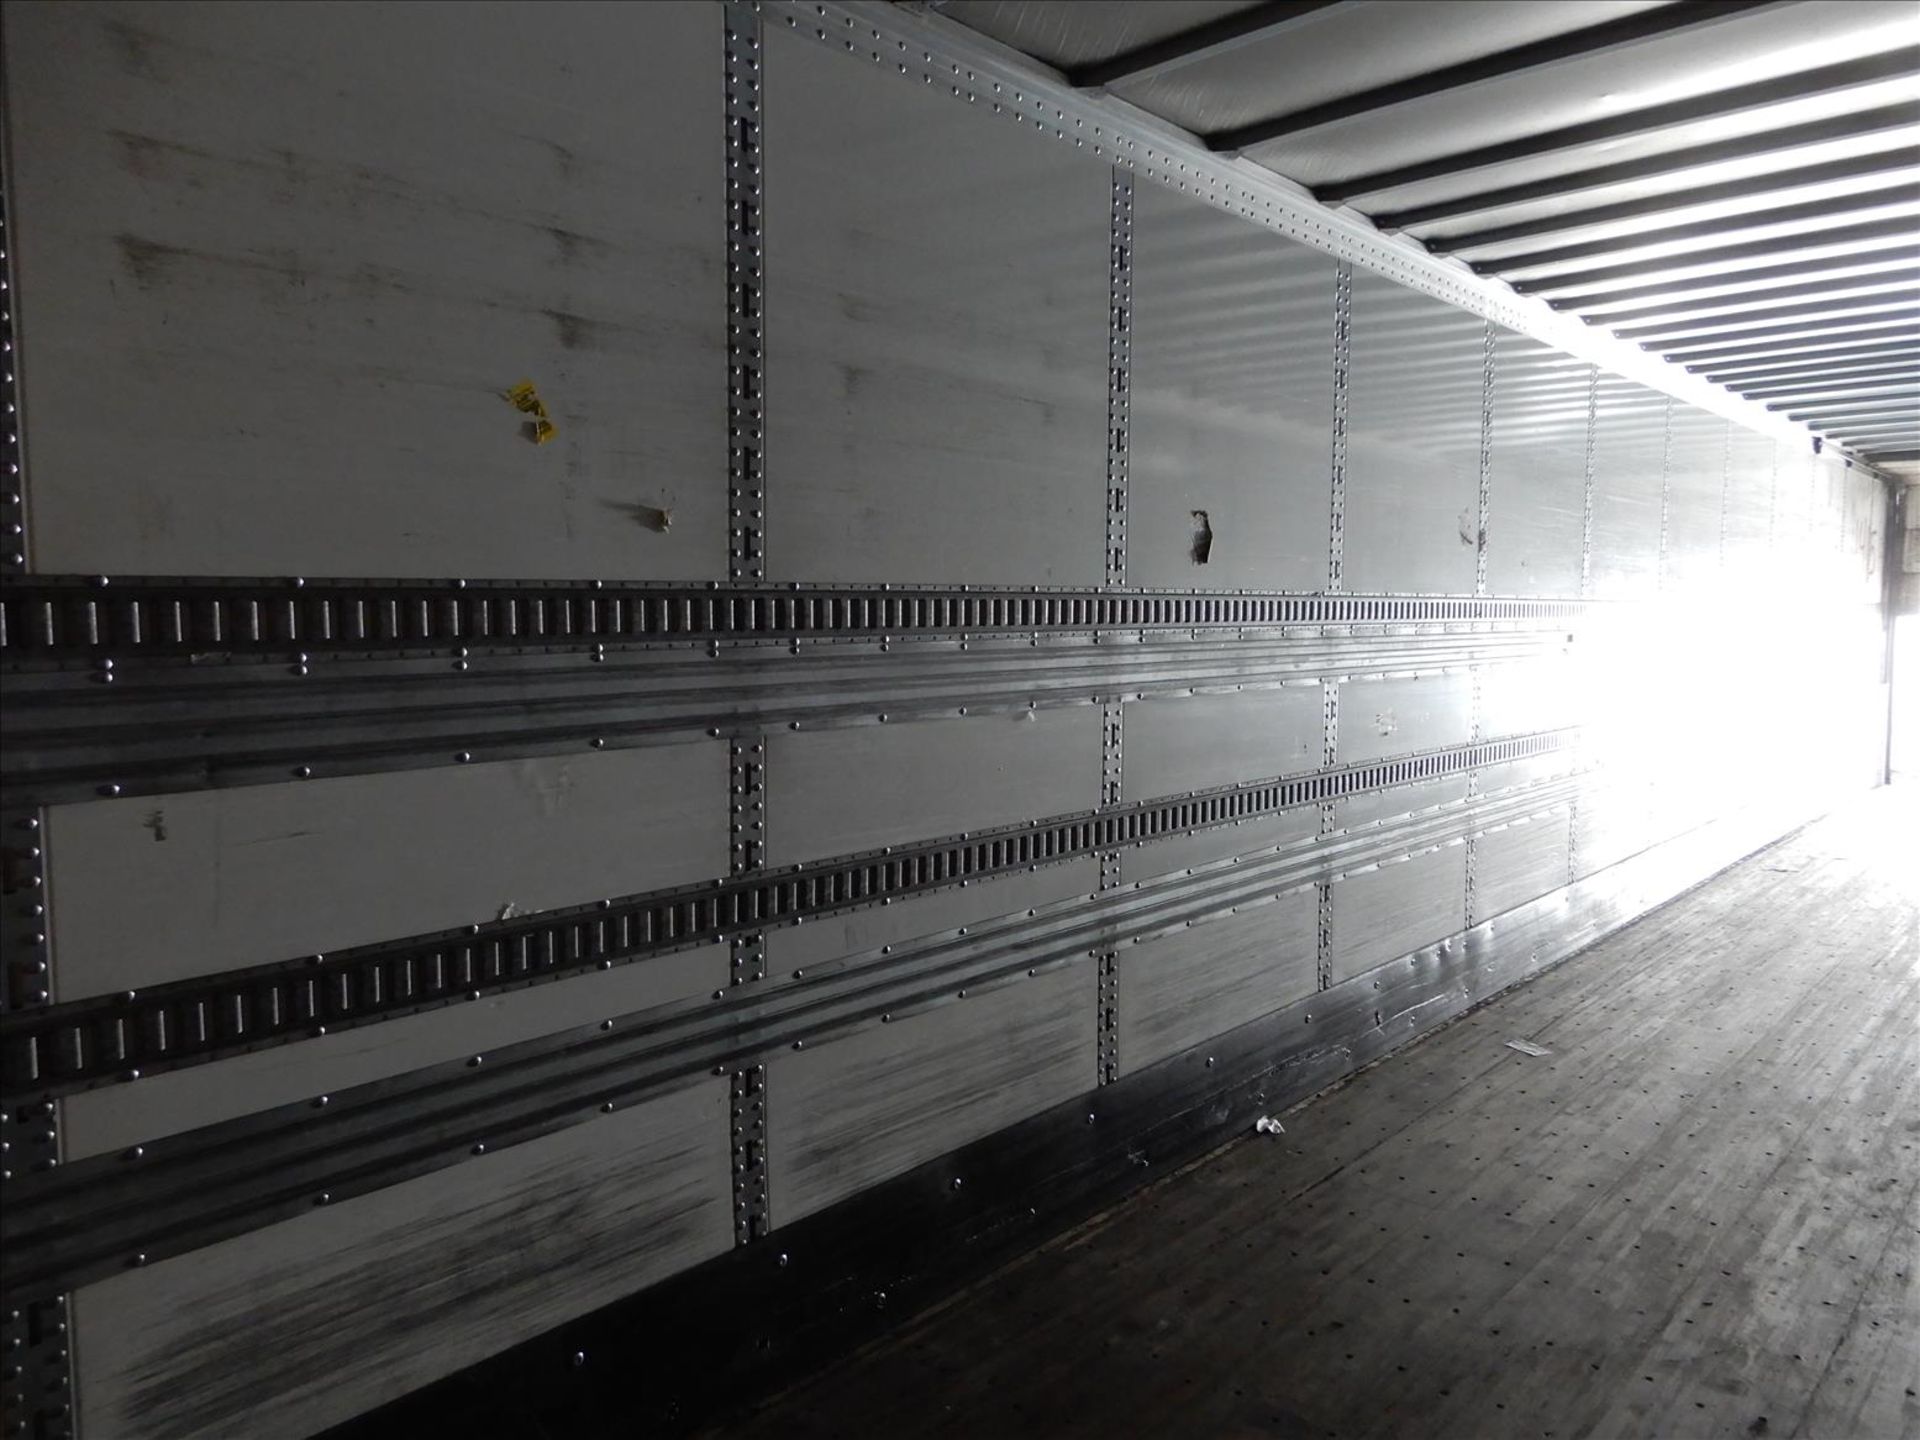 2012 Stoughton Trailer - Located in Indianapolis, IN - Image 18 of 25